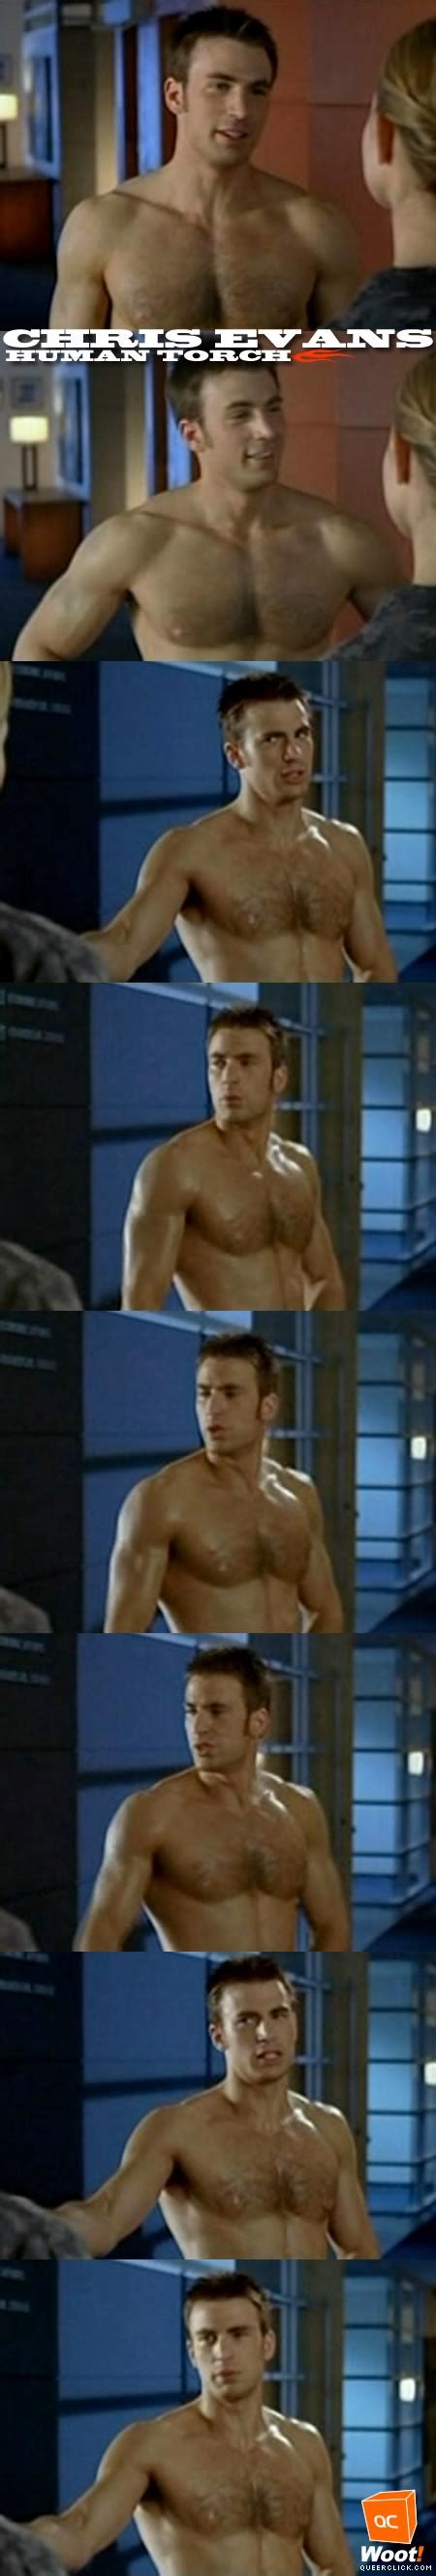 chris evans shirtless in fantastic 4 sequel queerclick